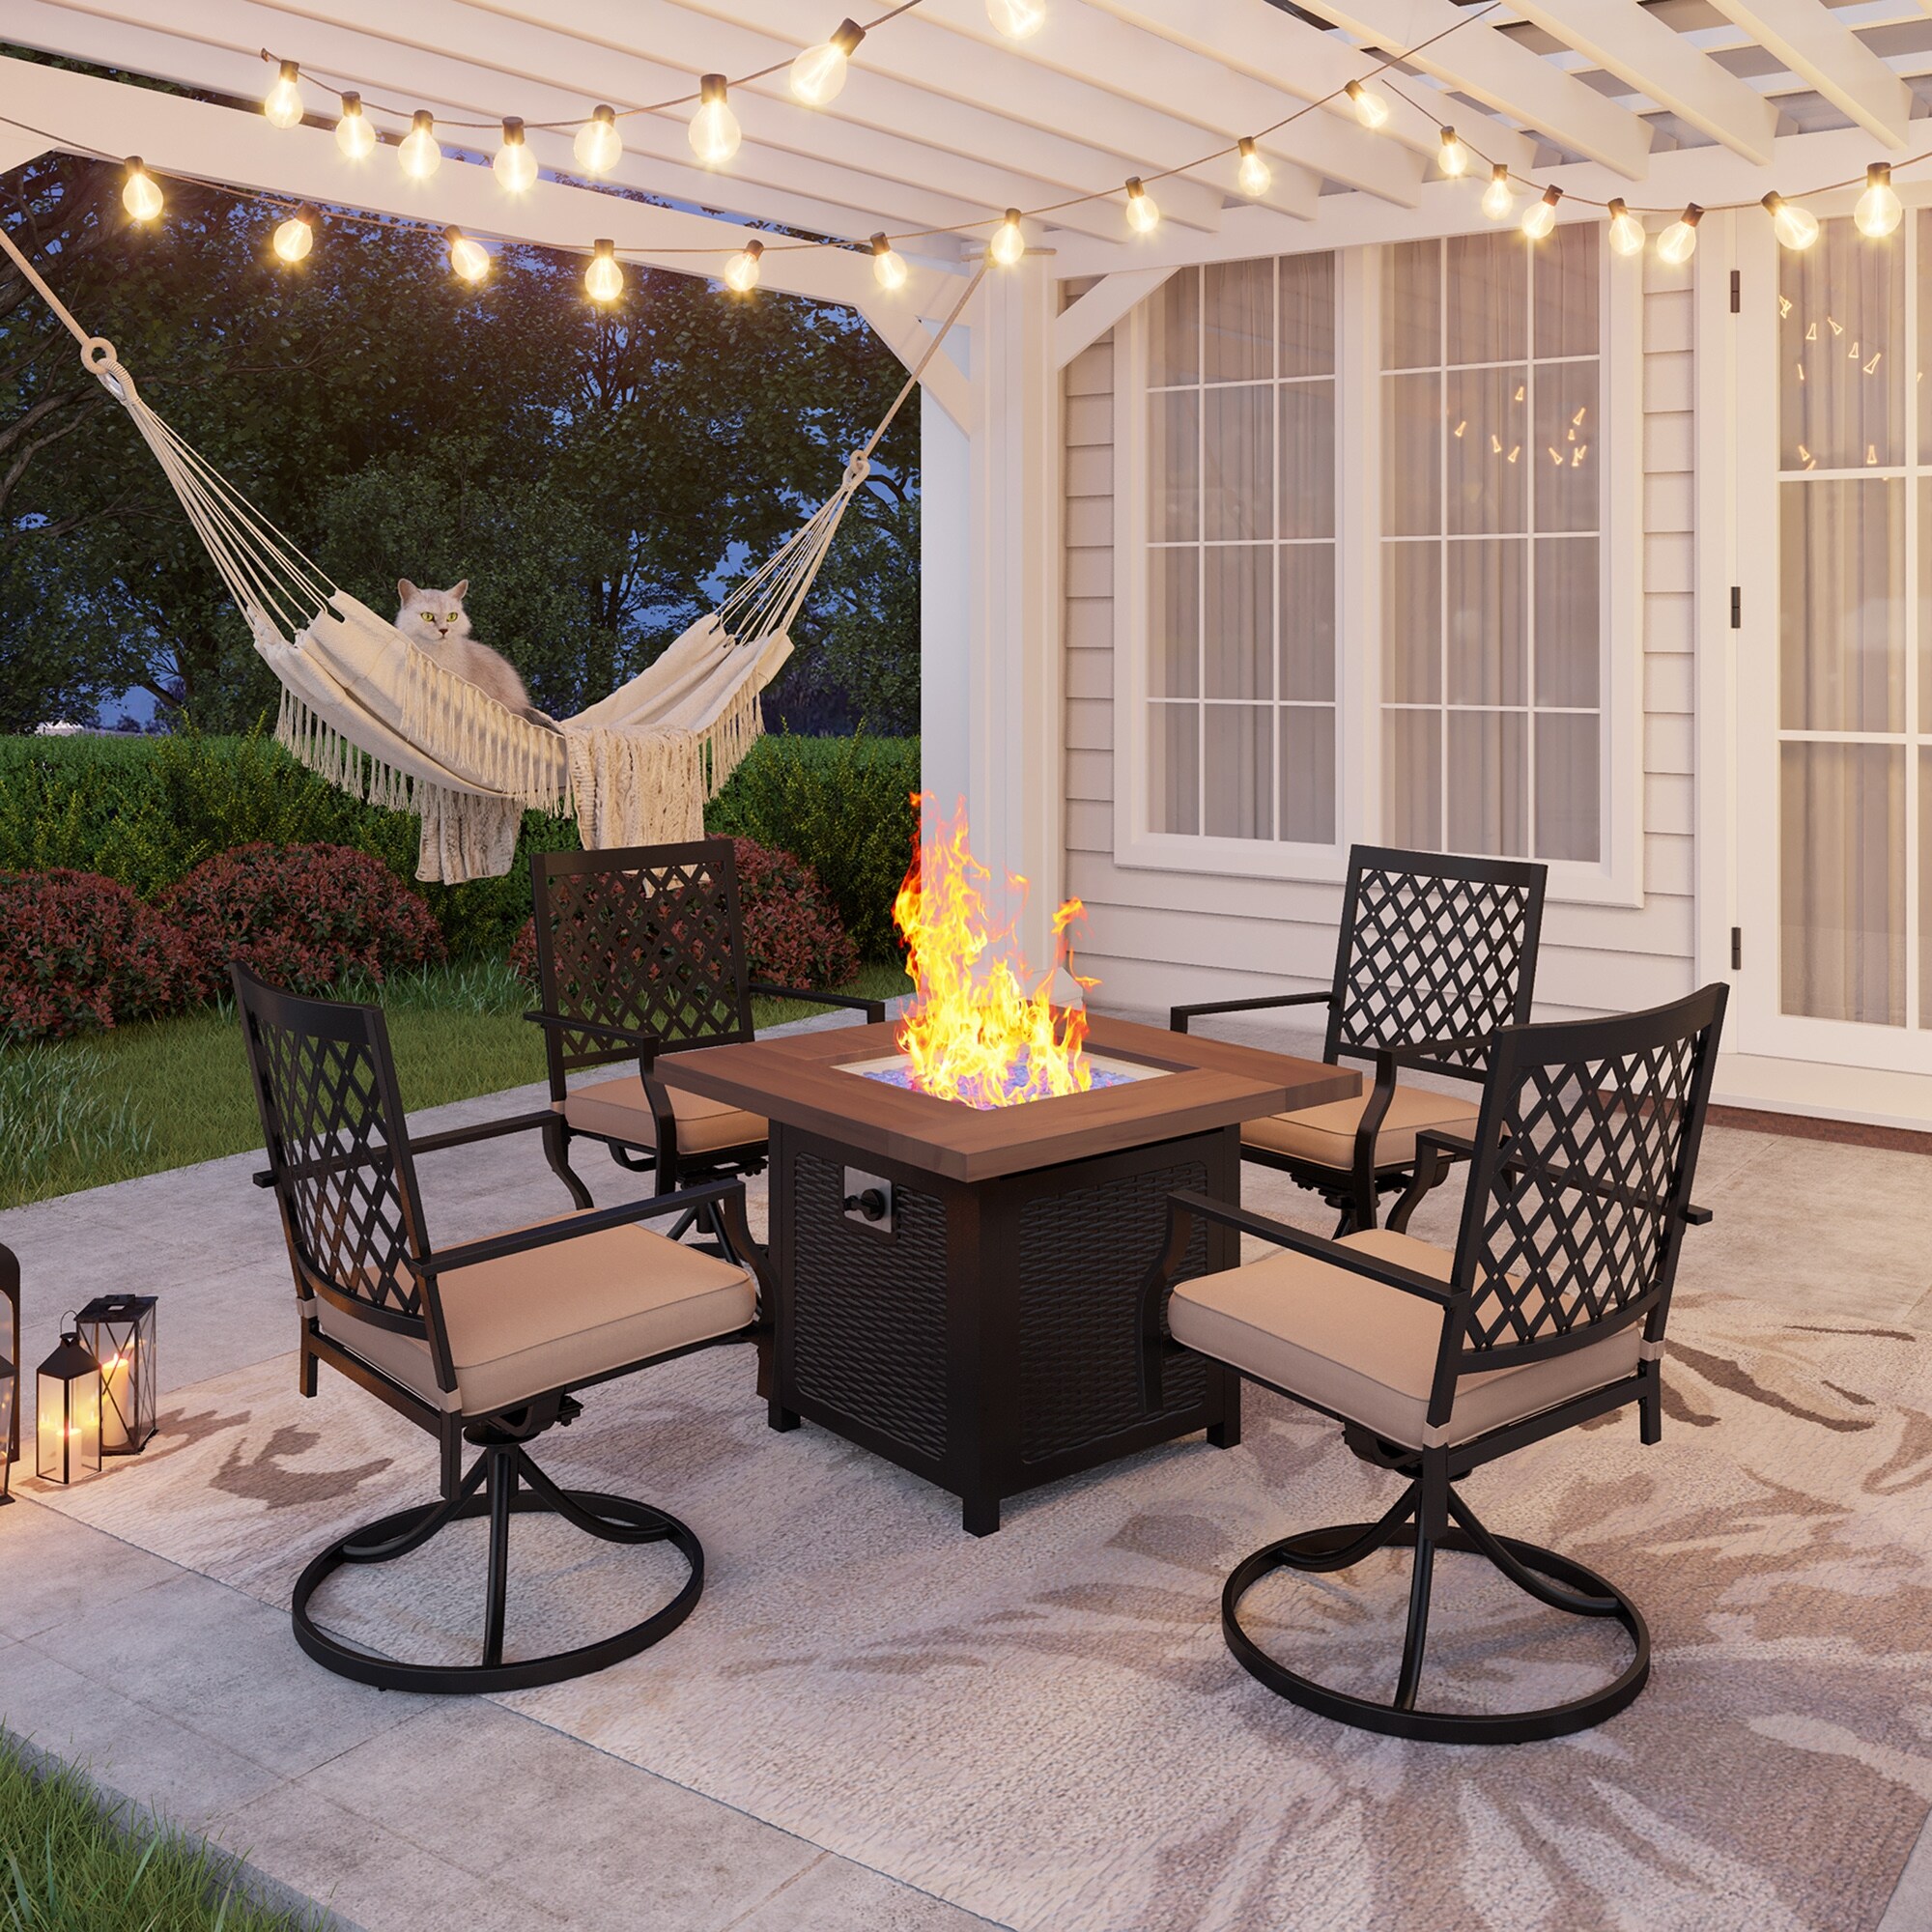 Mfstudio 5-piece Patio Furniture Propane Fire Pit Set  4 Metal Mesh Swivel Chairs And Square Fire Table